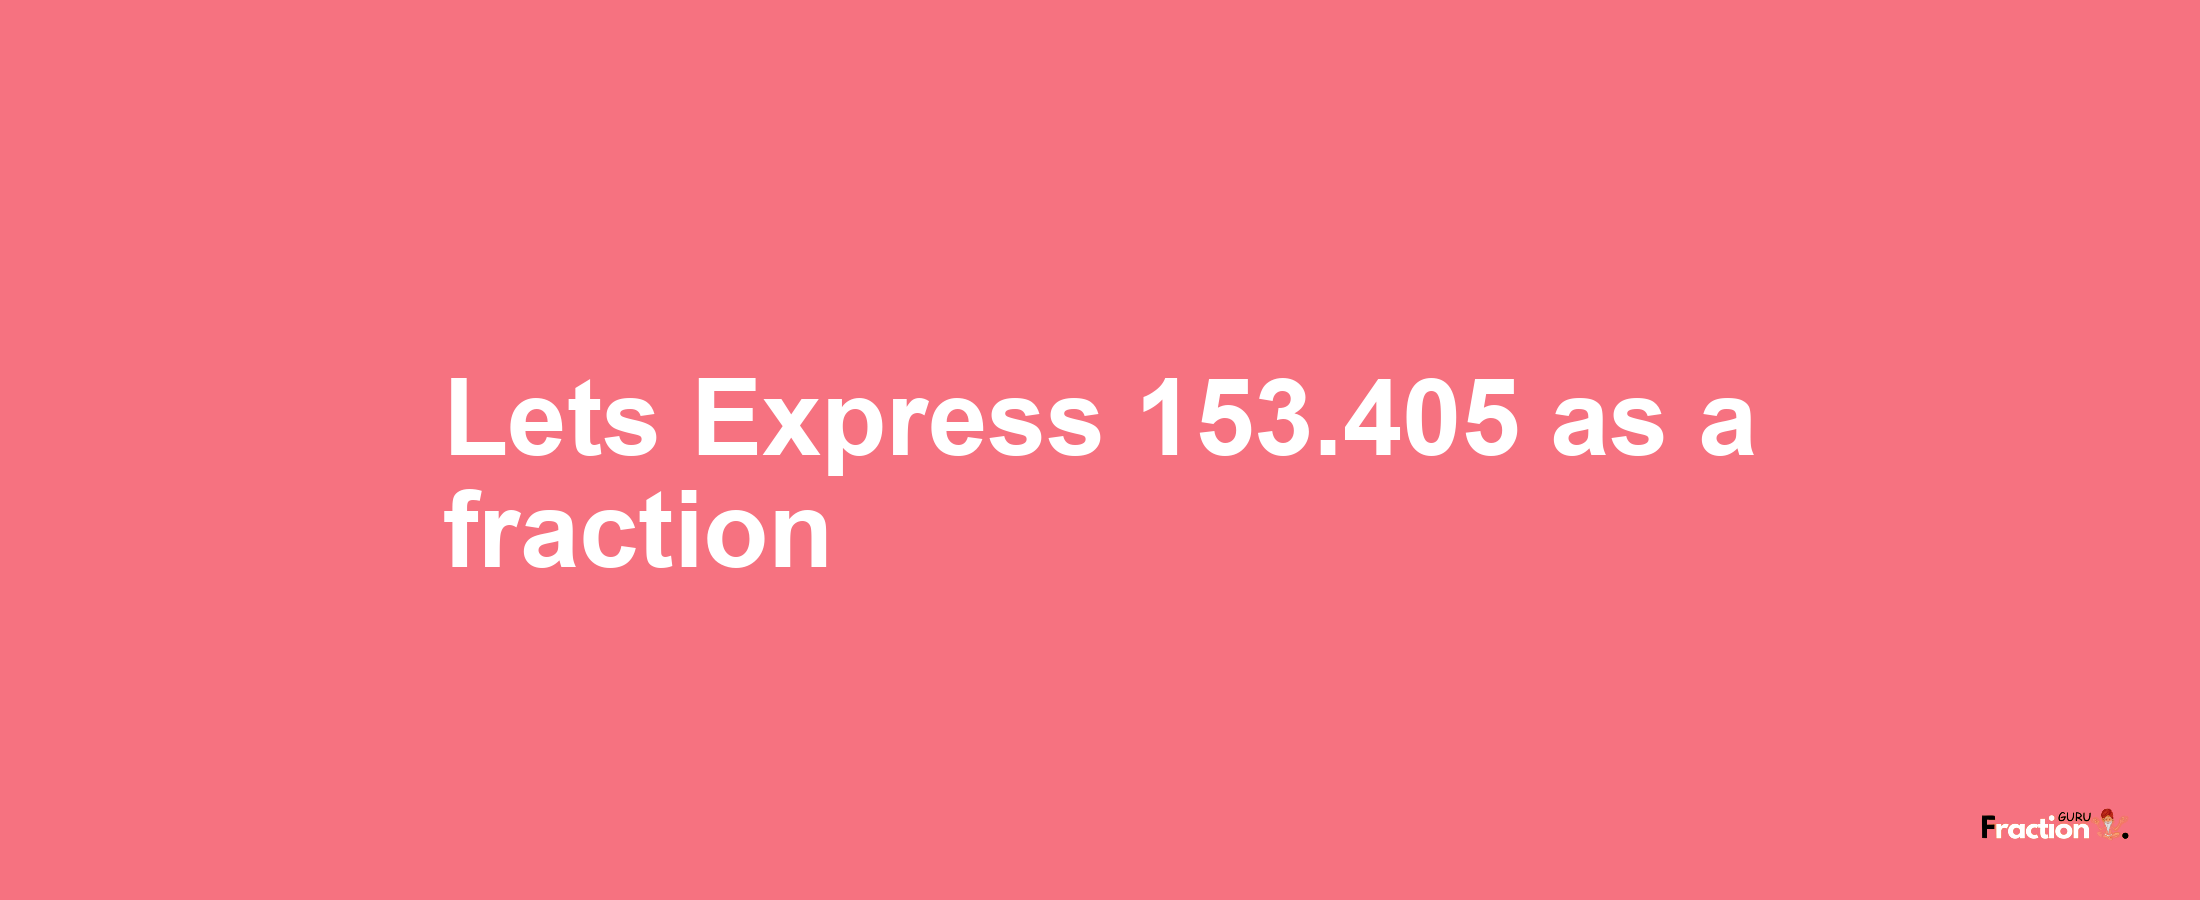 Lets Express 153.405 as afraction